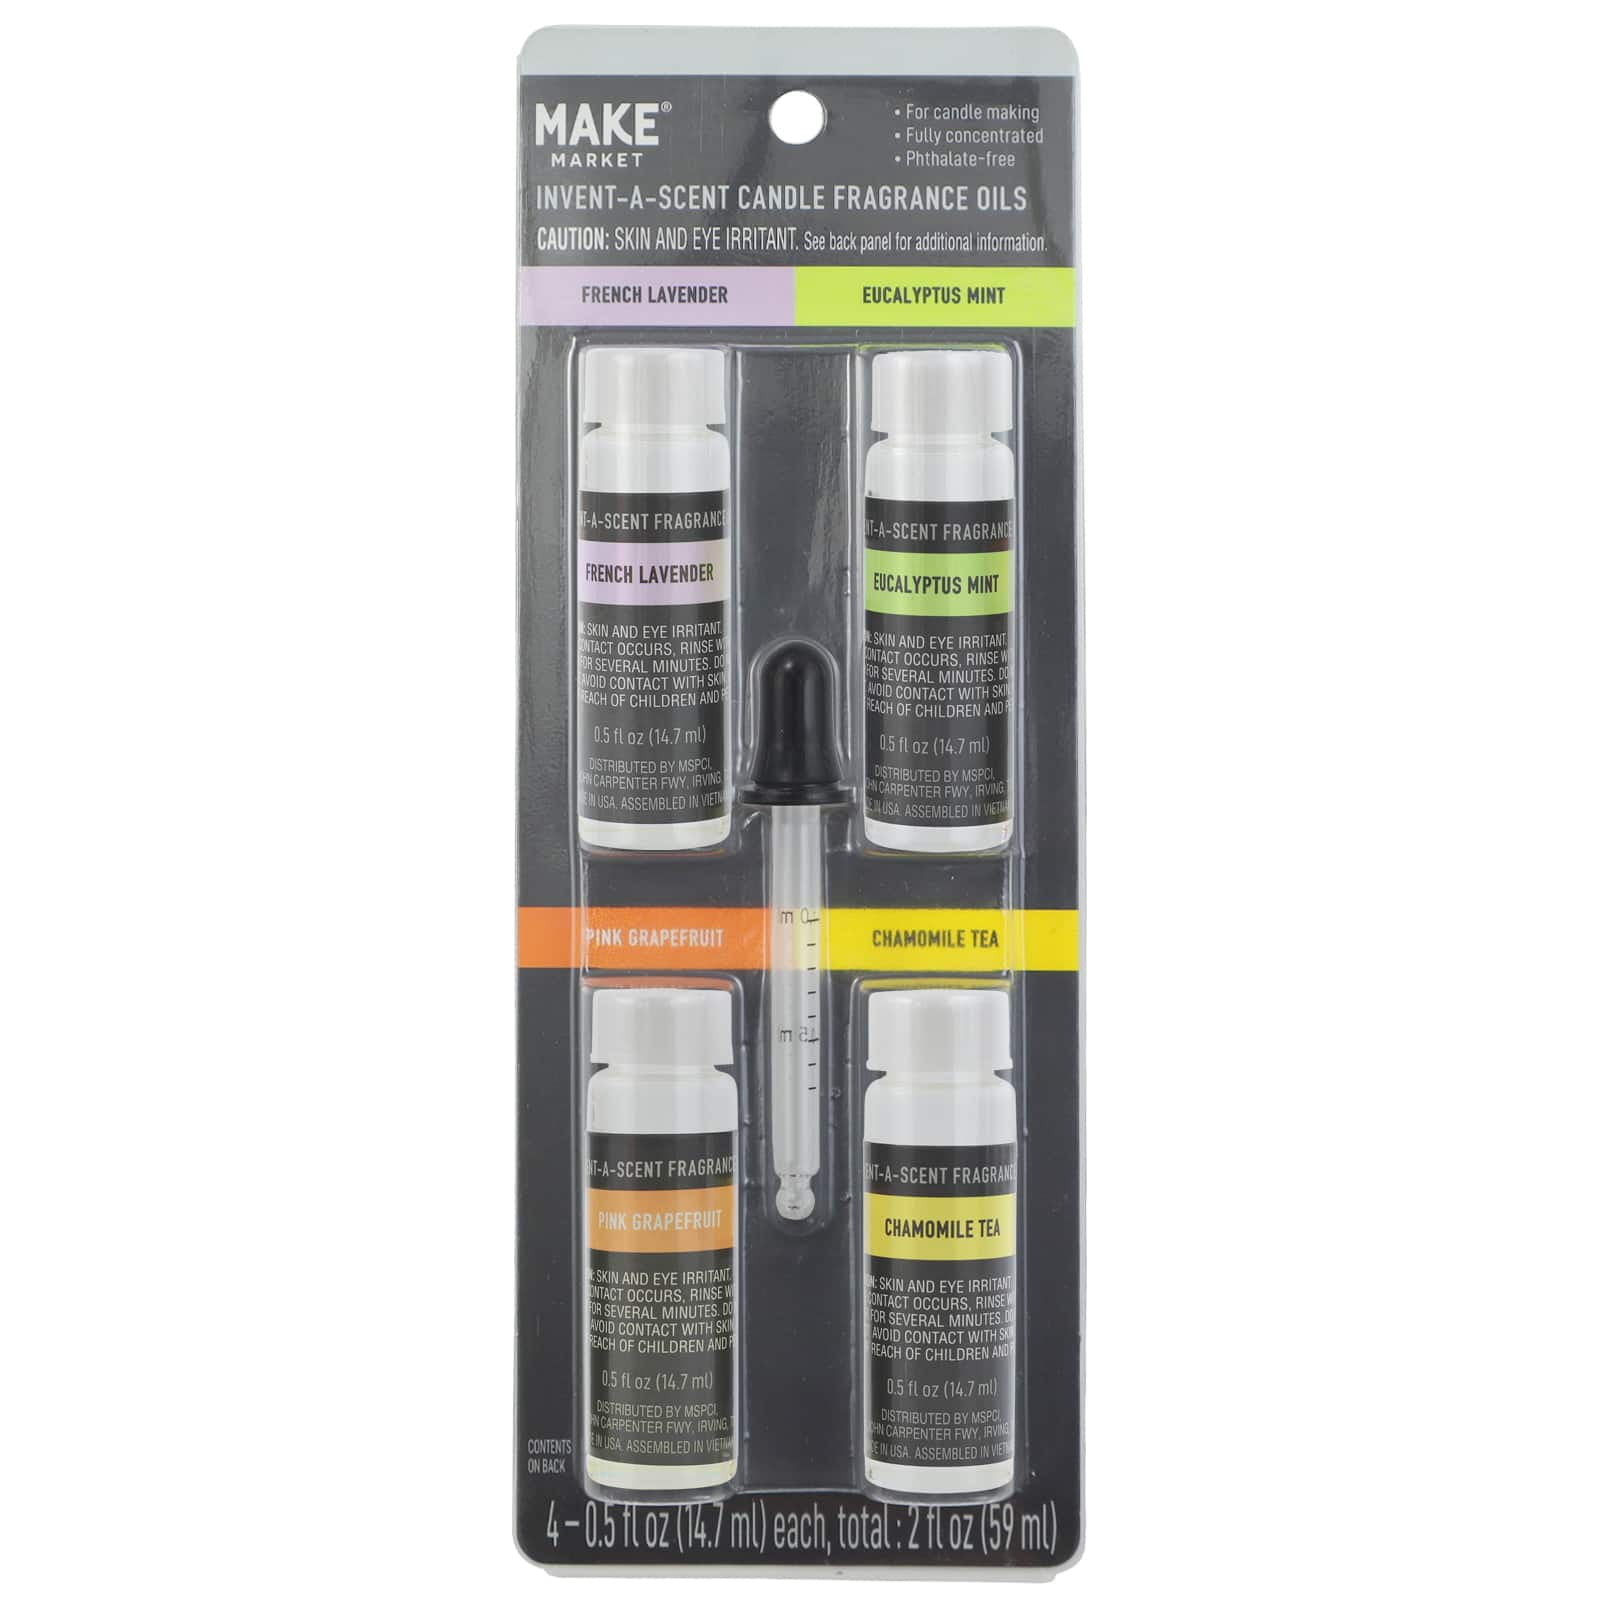 Invent-a-Scent Spa Candle Fragrance Oil Set by Make Market®